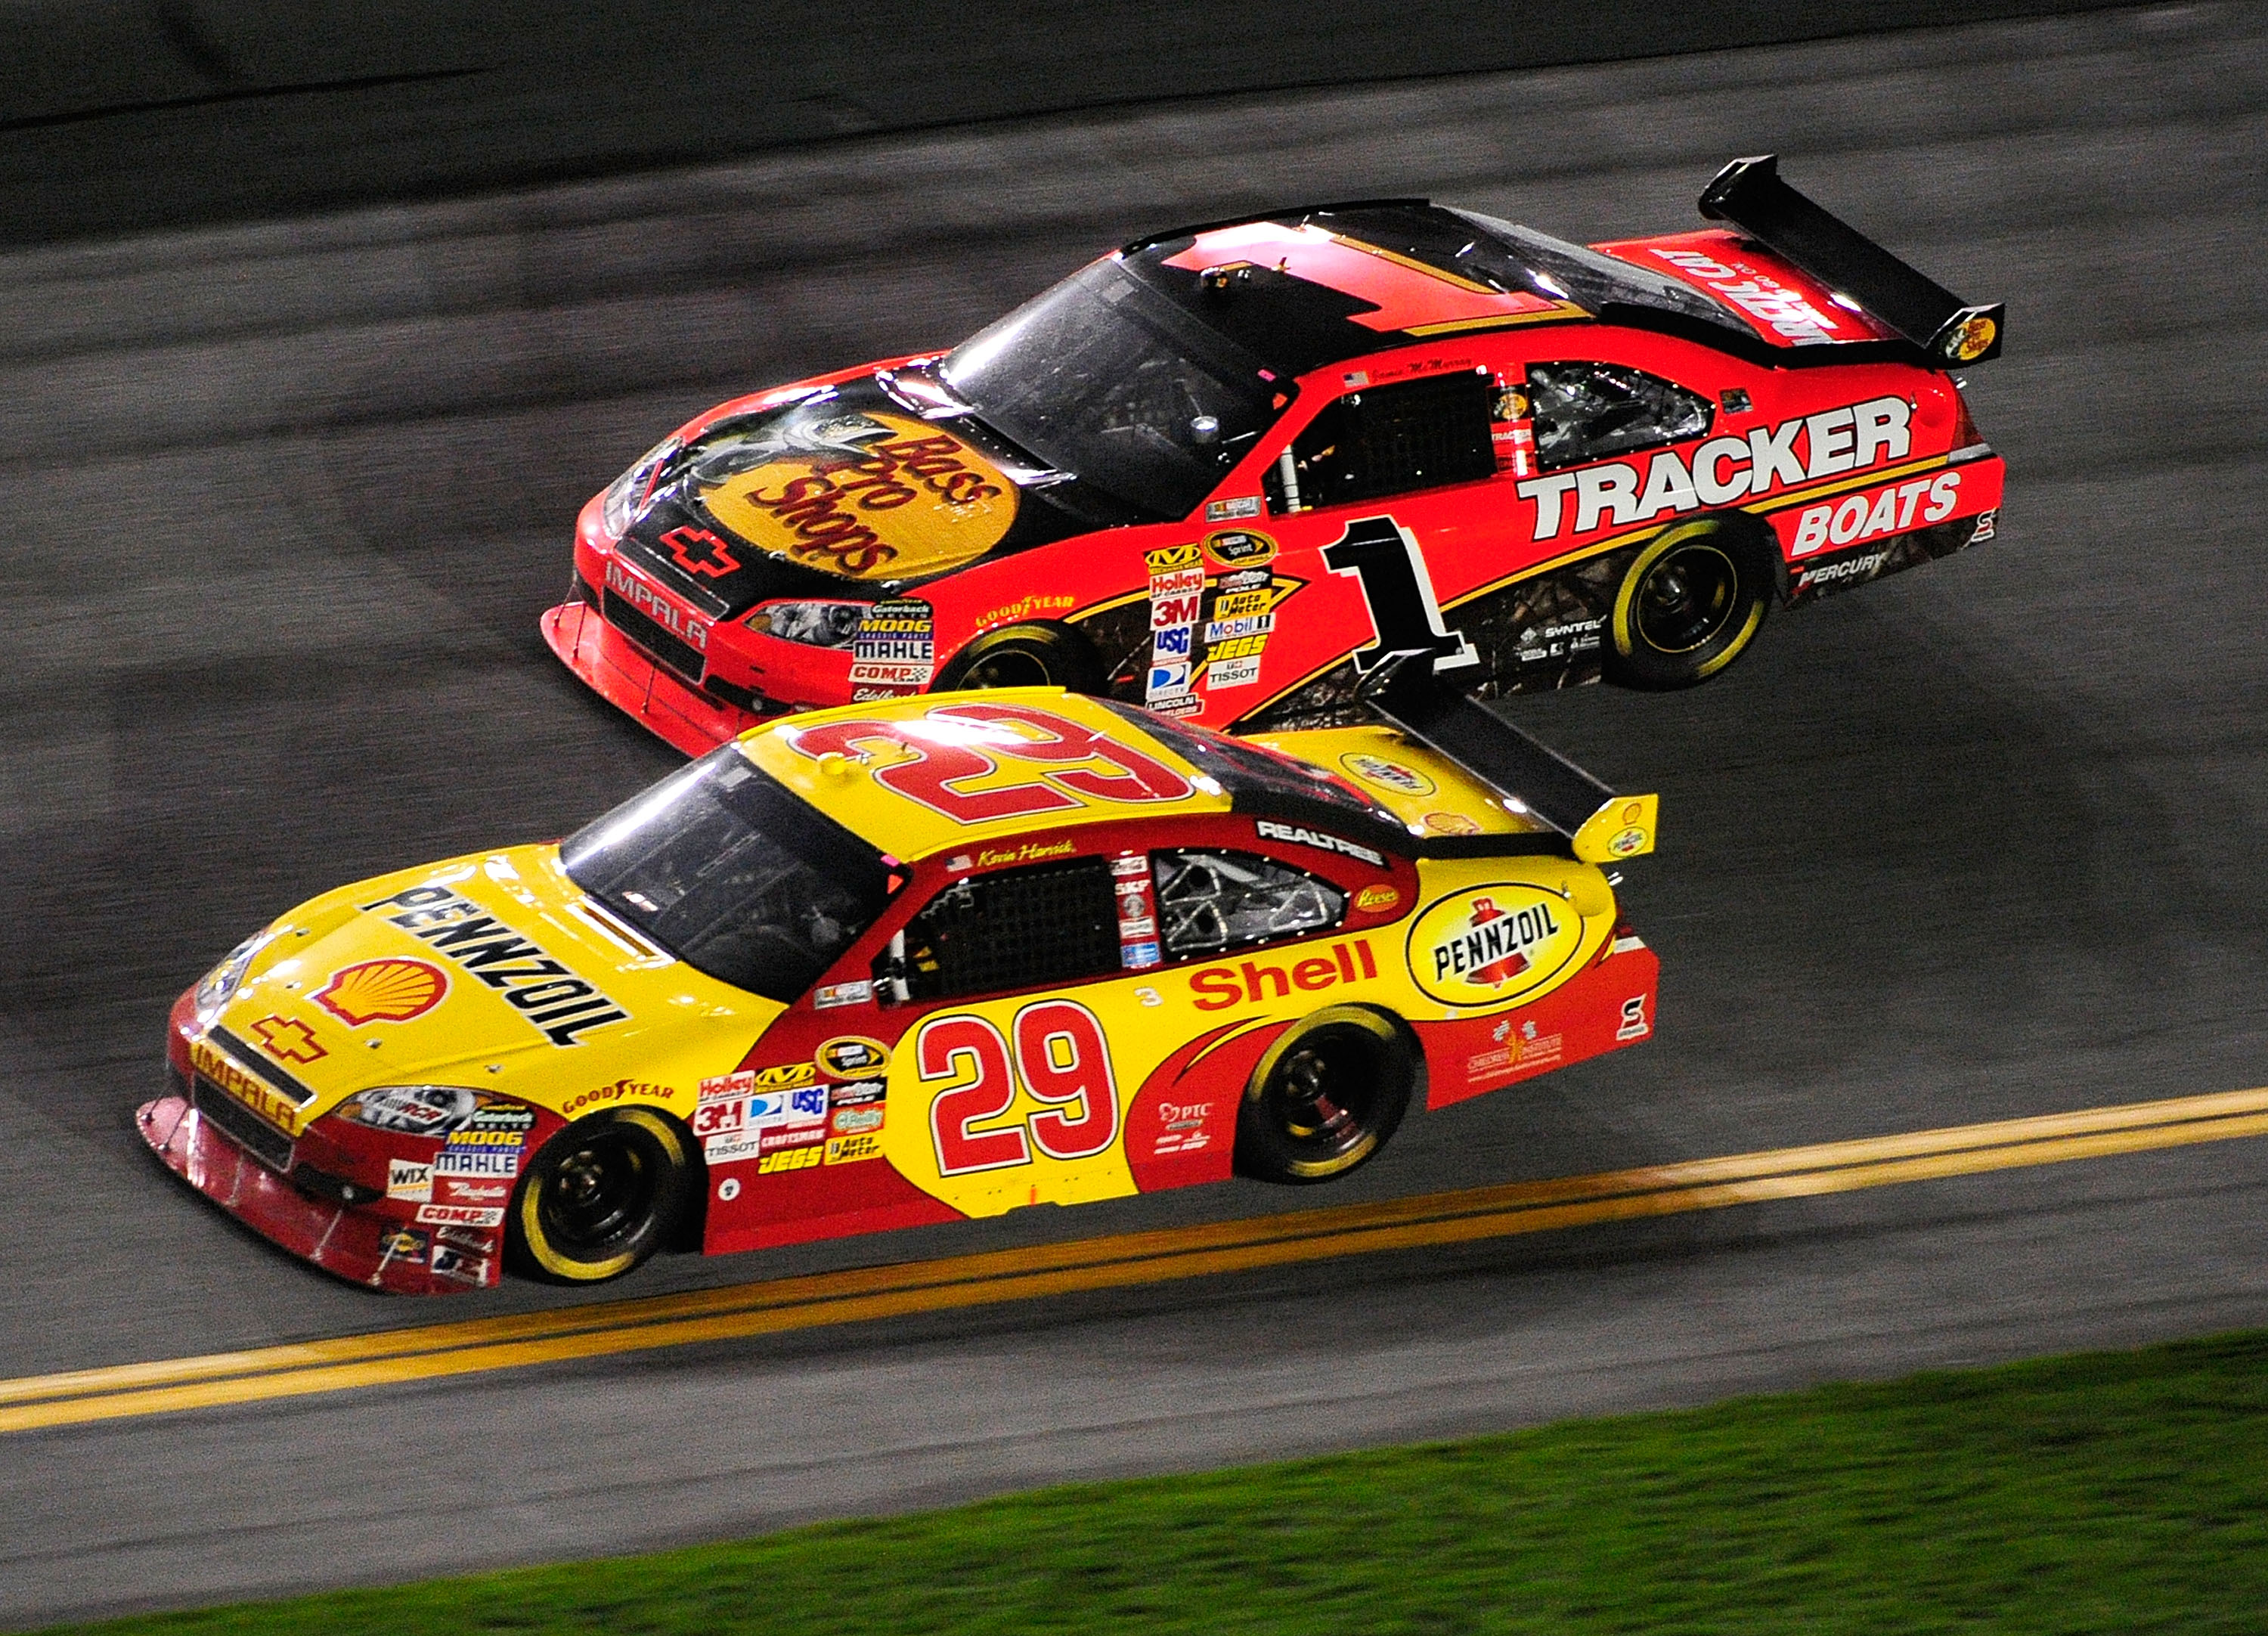 DAYTONA BEACH, FL - FEBRUARY 06:  Kevin Harvick, driver of the #29 Shell/Pennzoil Chevrolet, races Jamie McMurray, driver of the #Bass Pro Shops/Tracker Chevrolet, during the Budweiser Shootout at Daytona International Speedway on February 6, 2010 in Dayt